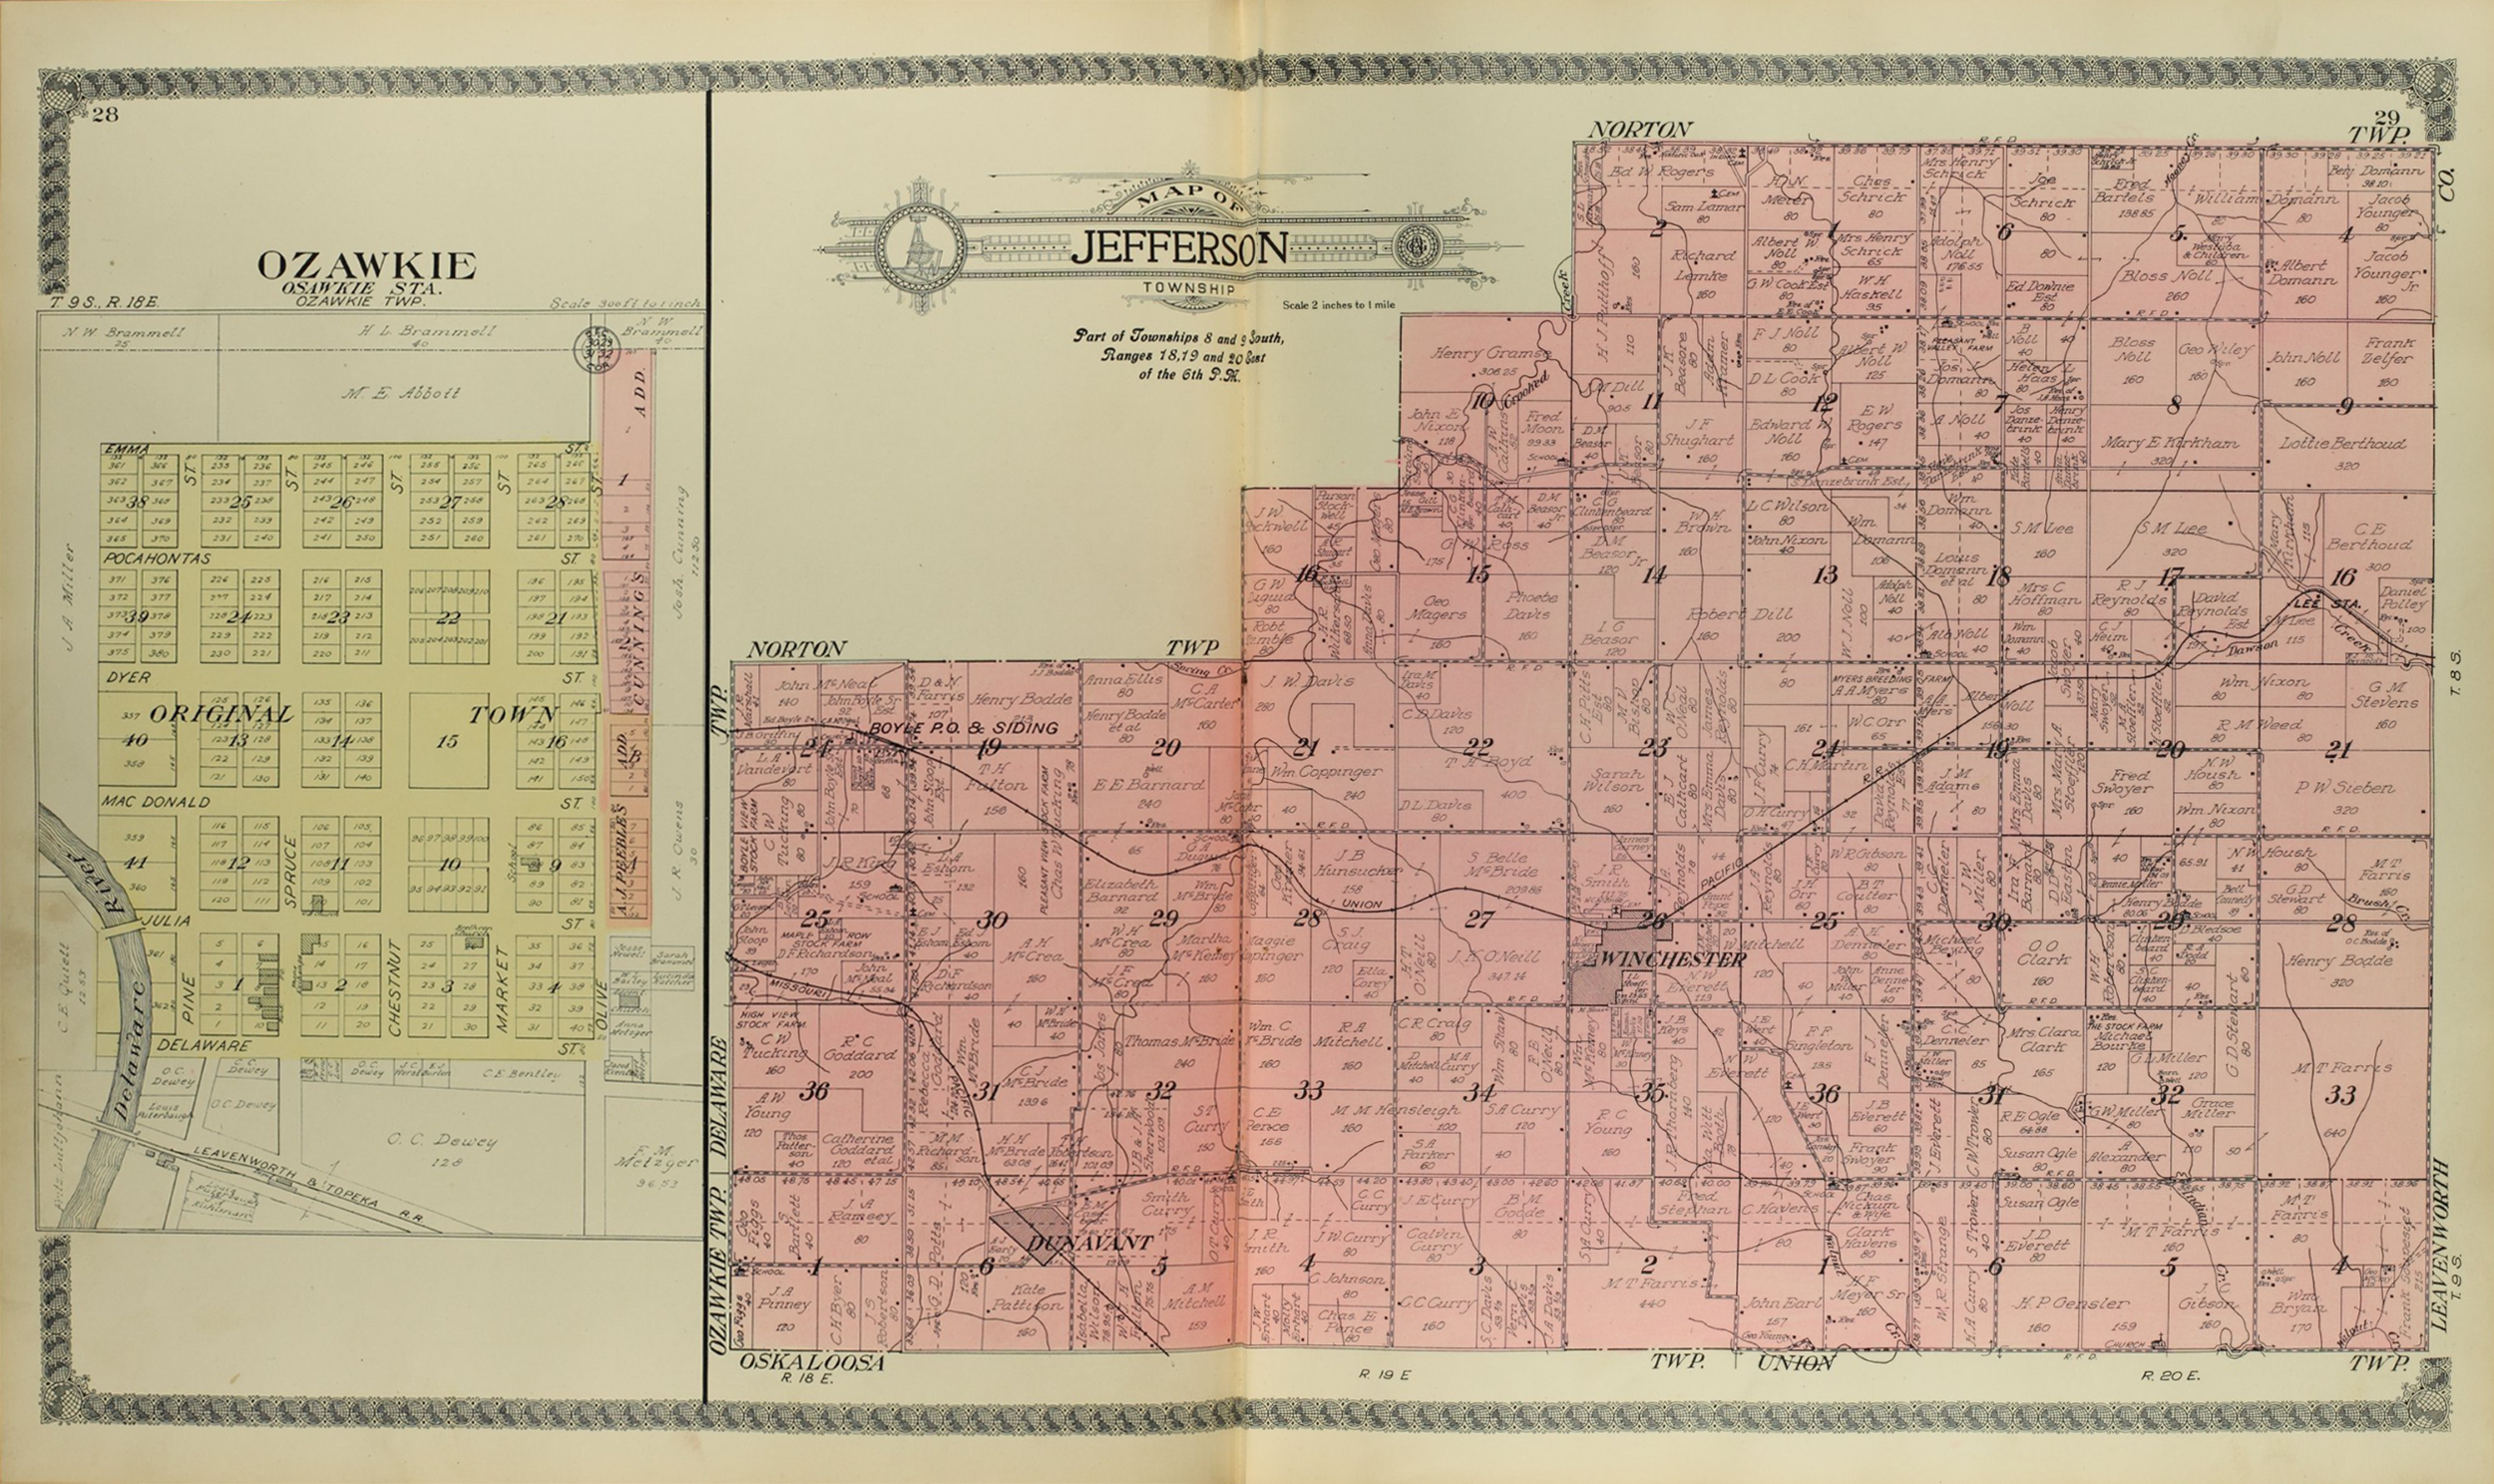 County map with square divisions tinted pink. The legend reads "Map of / Jefferson / Township." To the left is a detail titled "Ozawkie," with square divisions tinted yellow. 